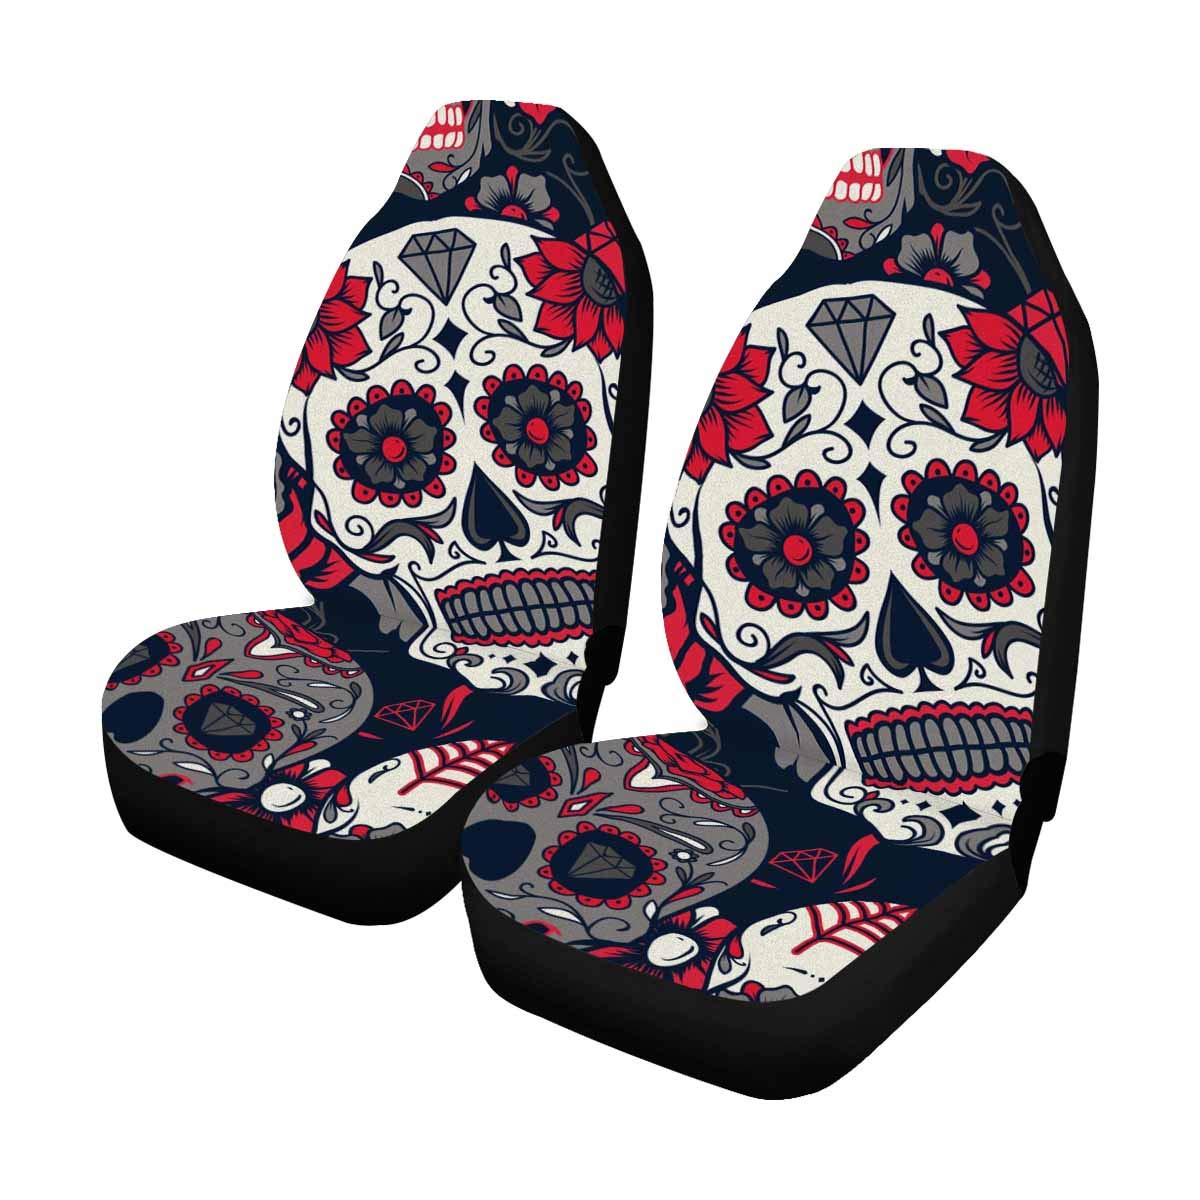 Damask Seamless Floral Flowers Pattern Car Seat Covers Protector Set